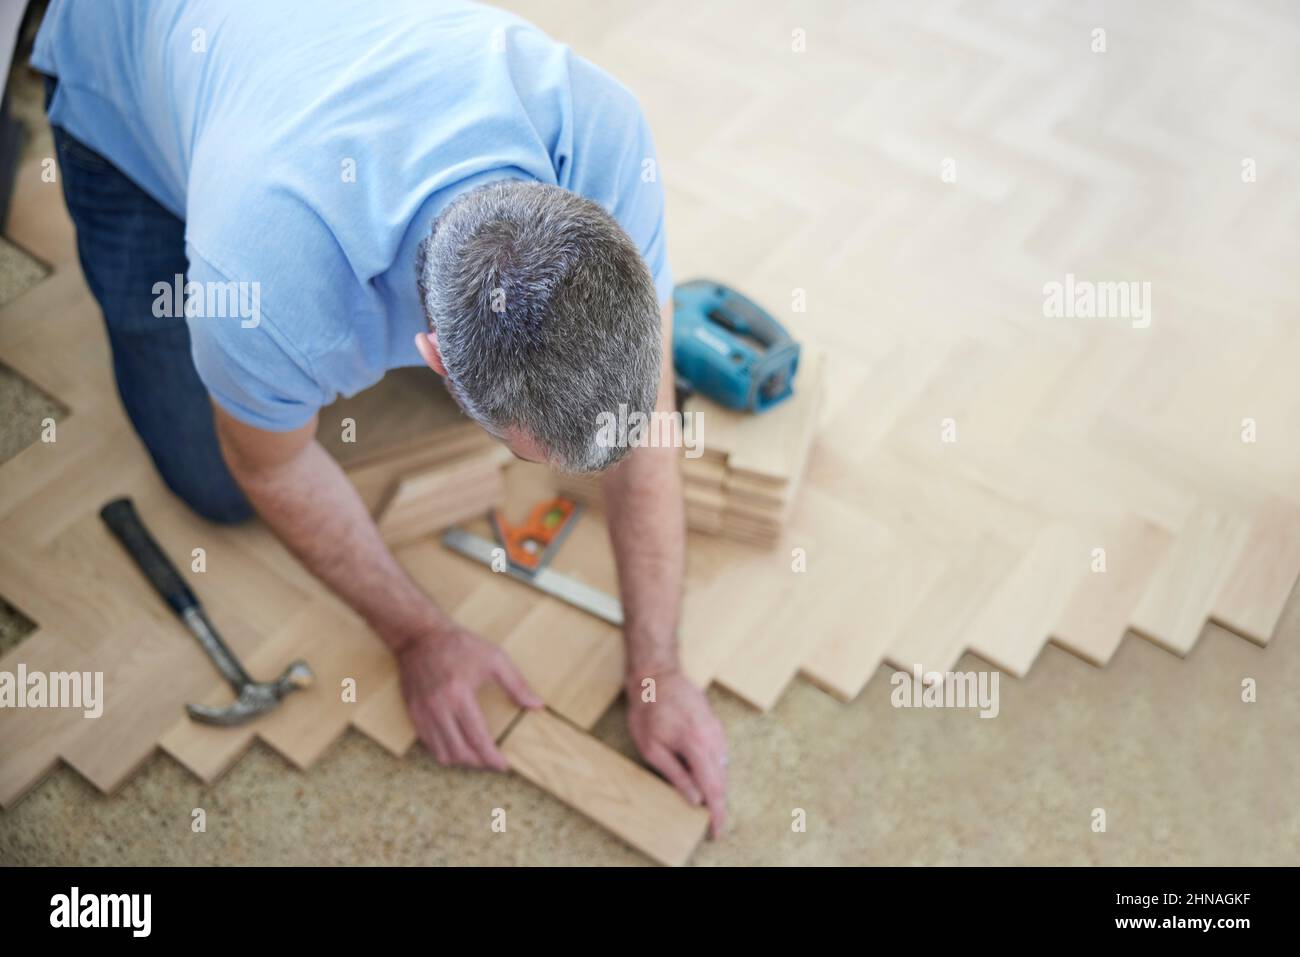 Overhead View Of Carpenter Or Builder Laying New Wood Block Parquet Parquet Floor In Kitchen At Home Stock Photo